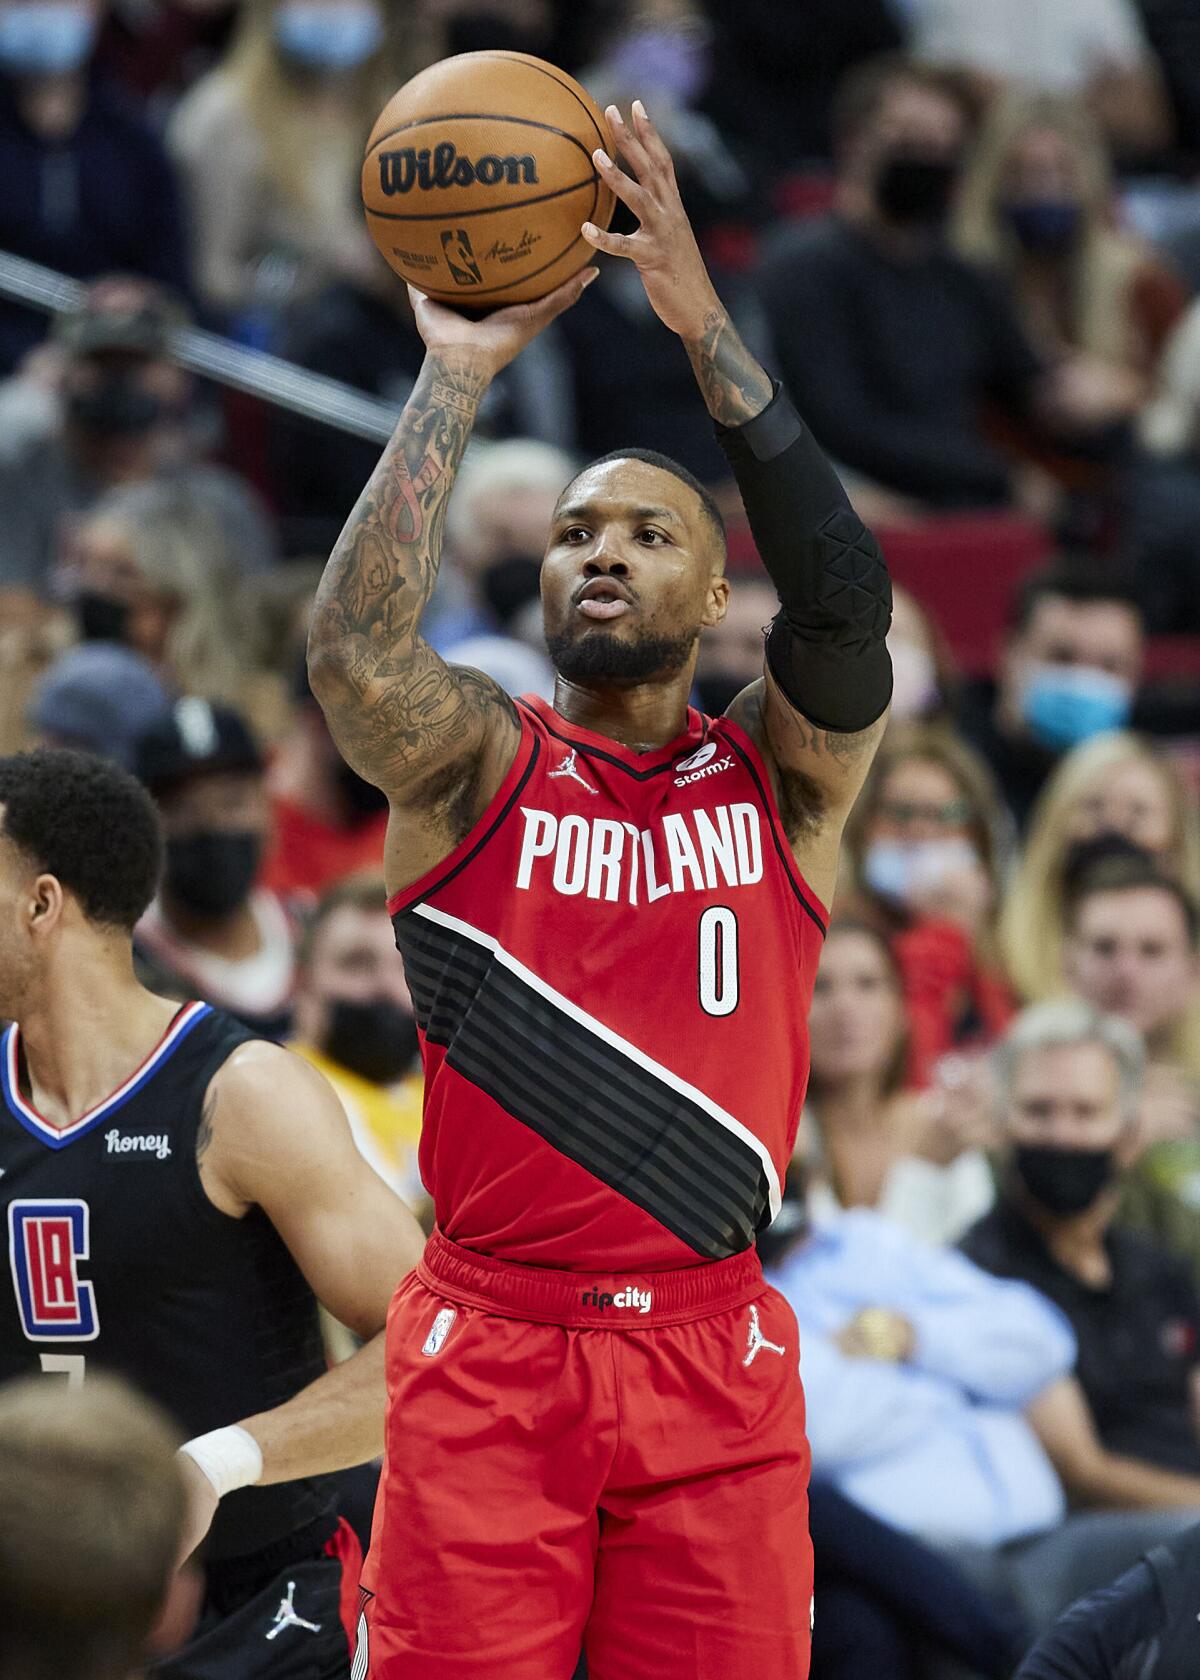 Portland guard Damian Lillard shoots against the Clippers on Oct. 29, 2021.